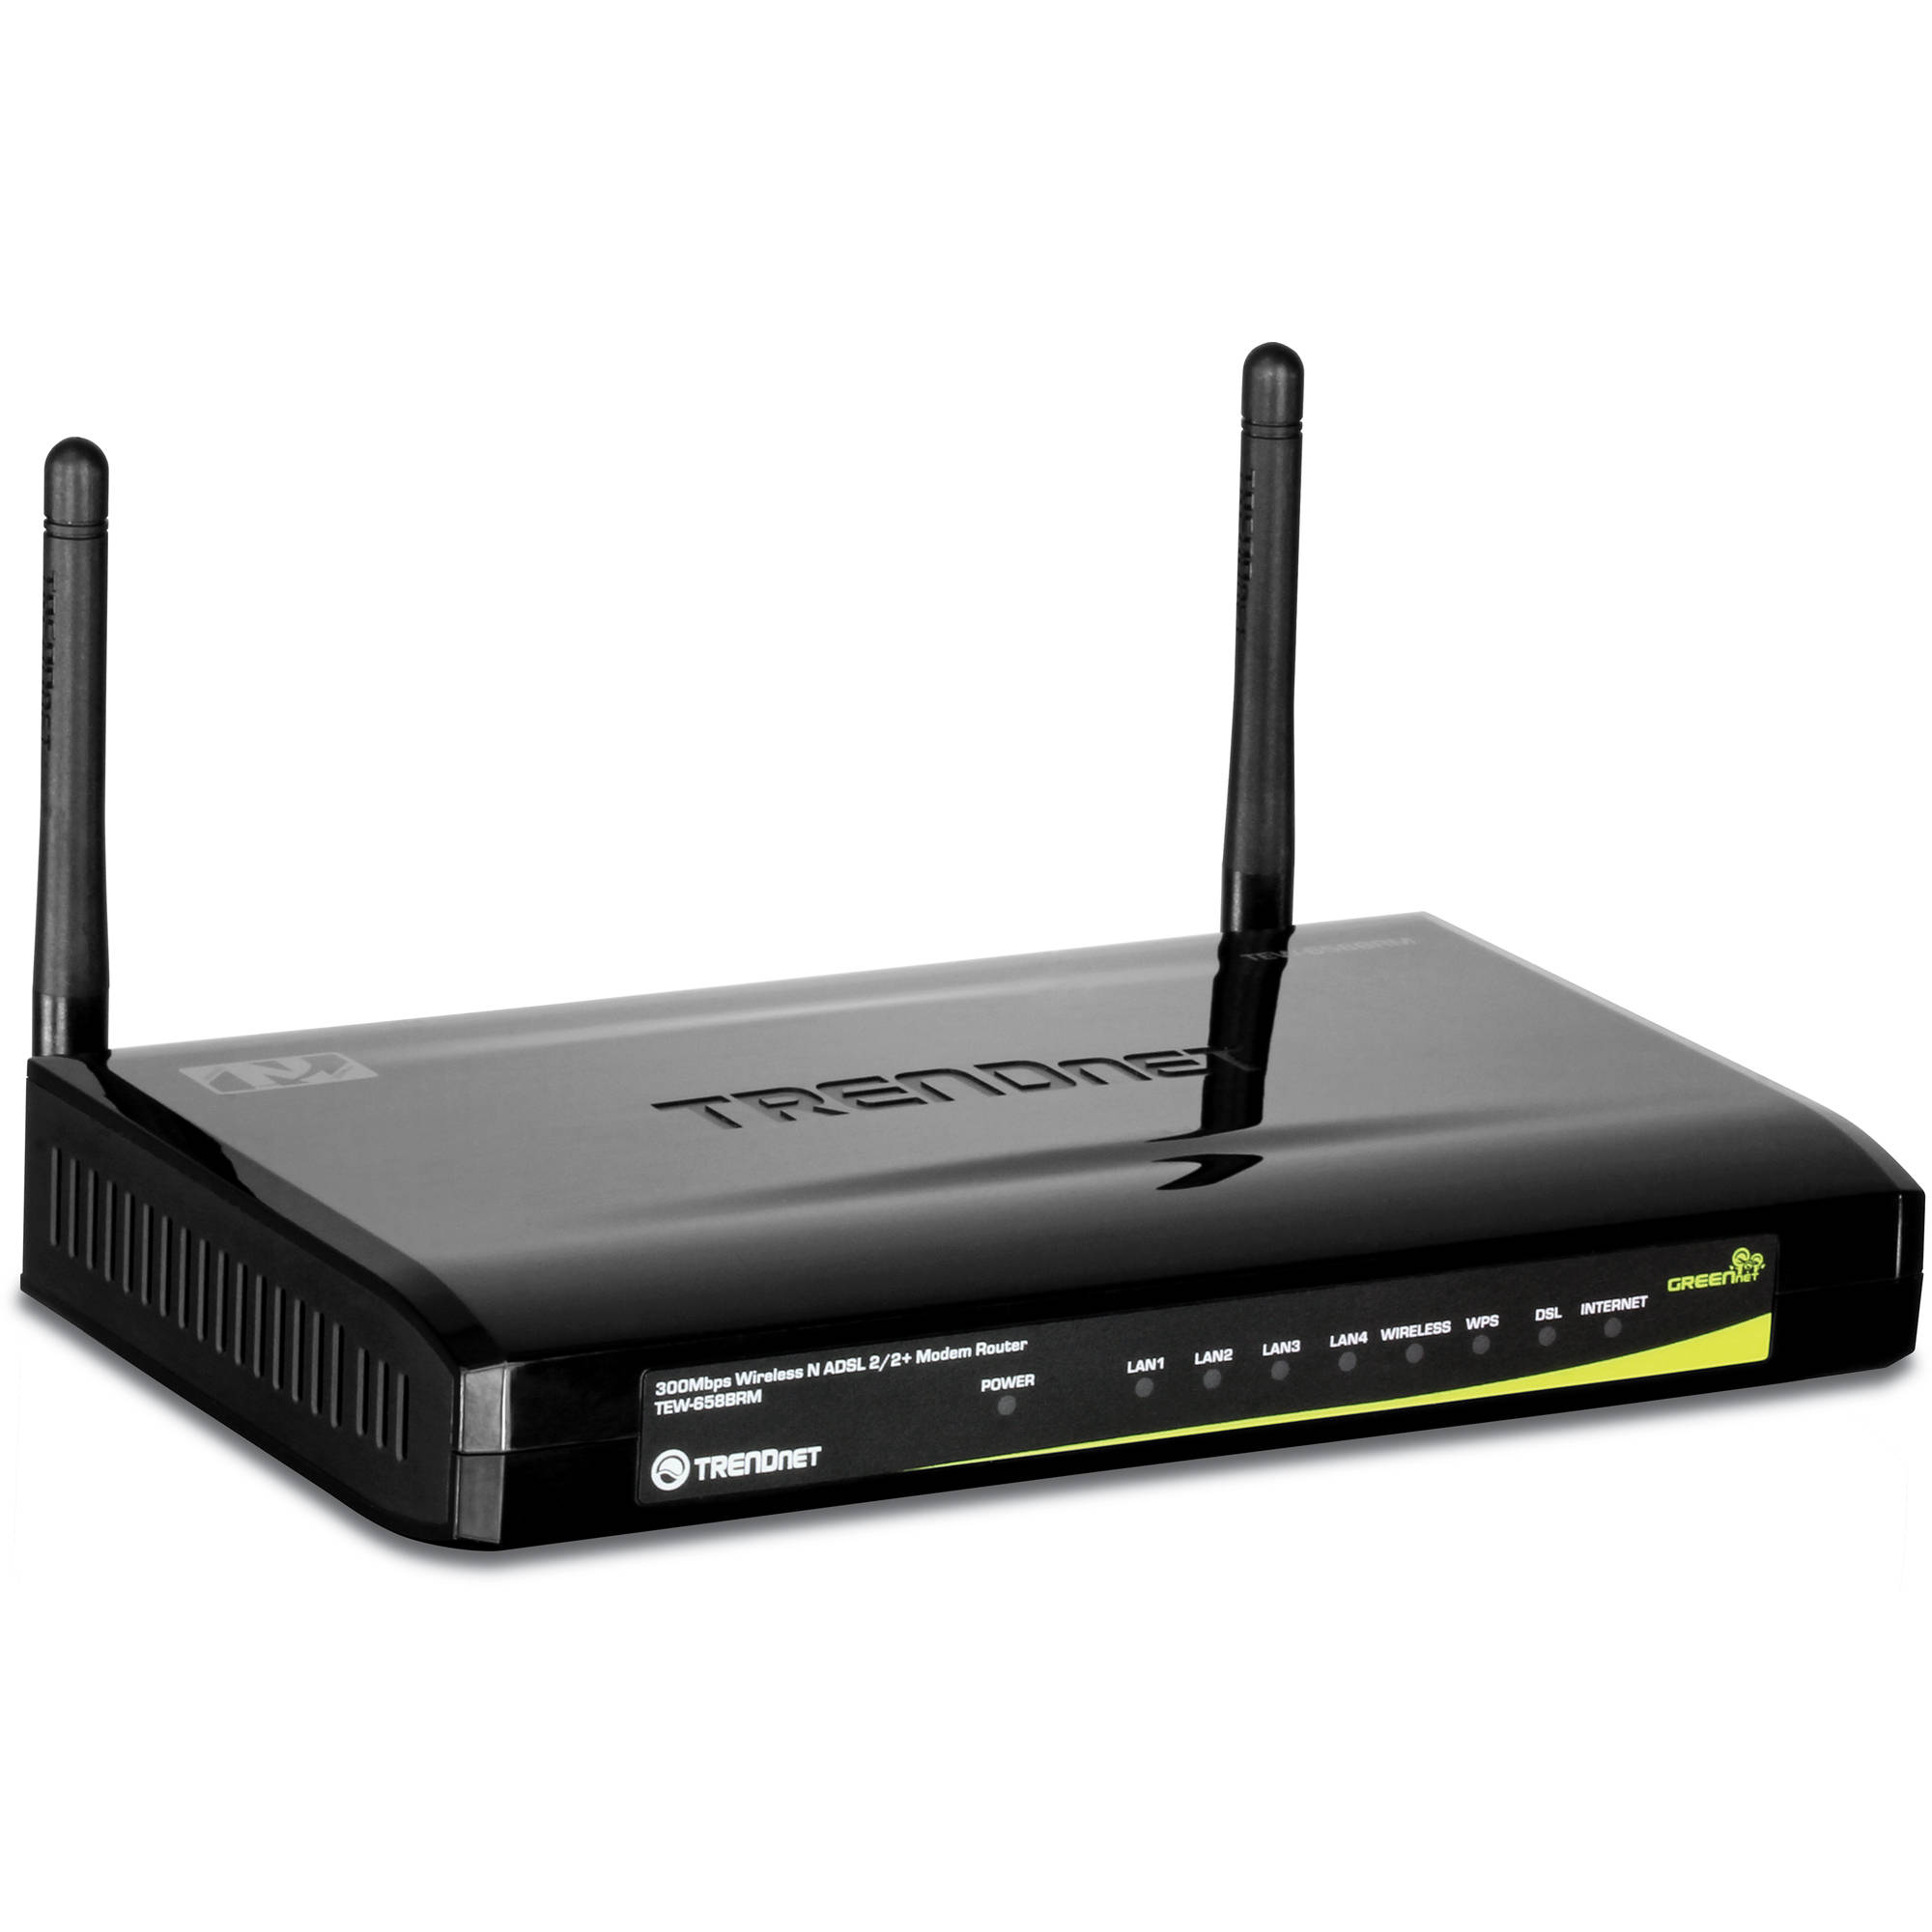 dsl modem and wireless router